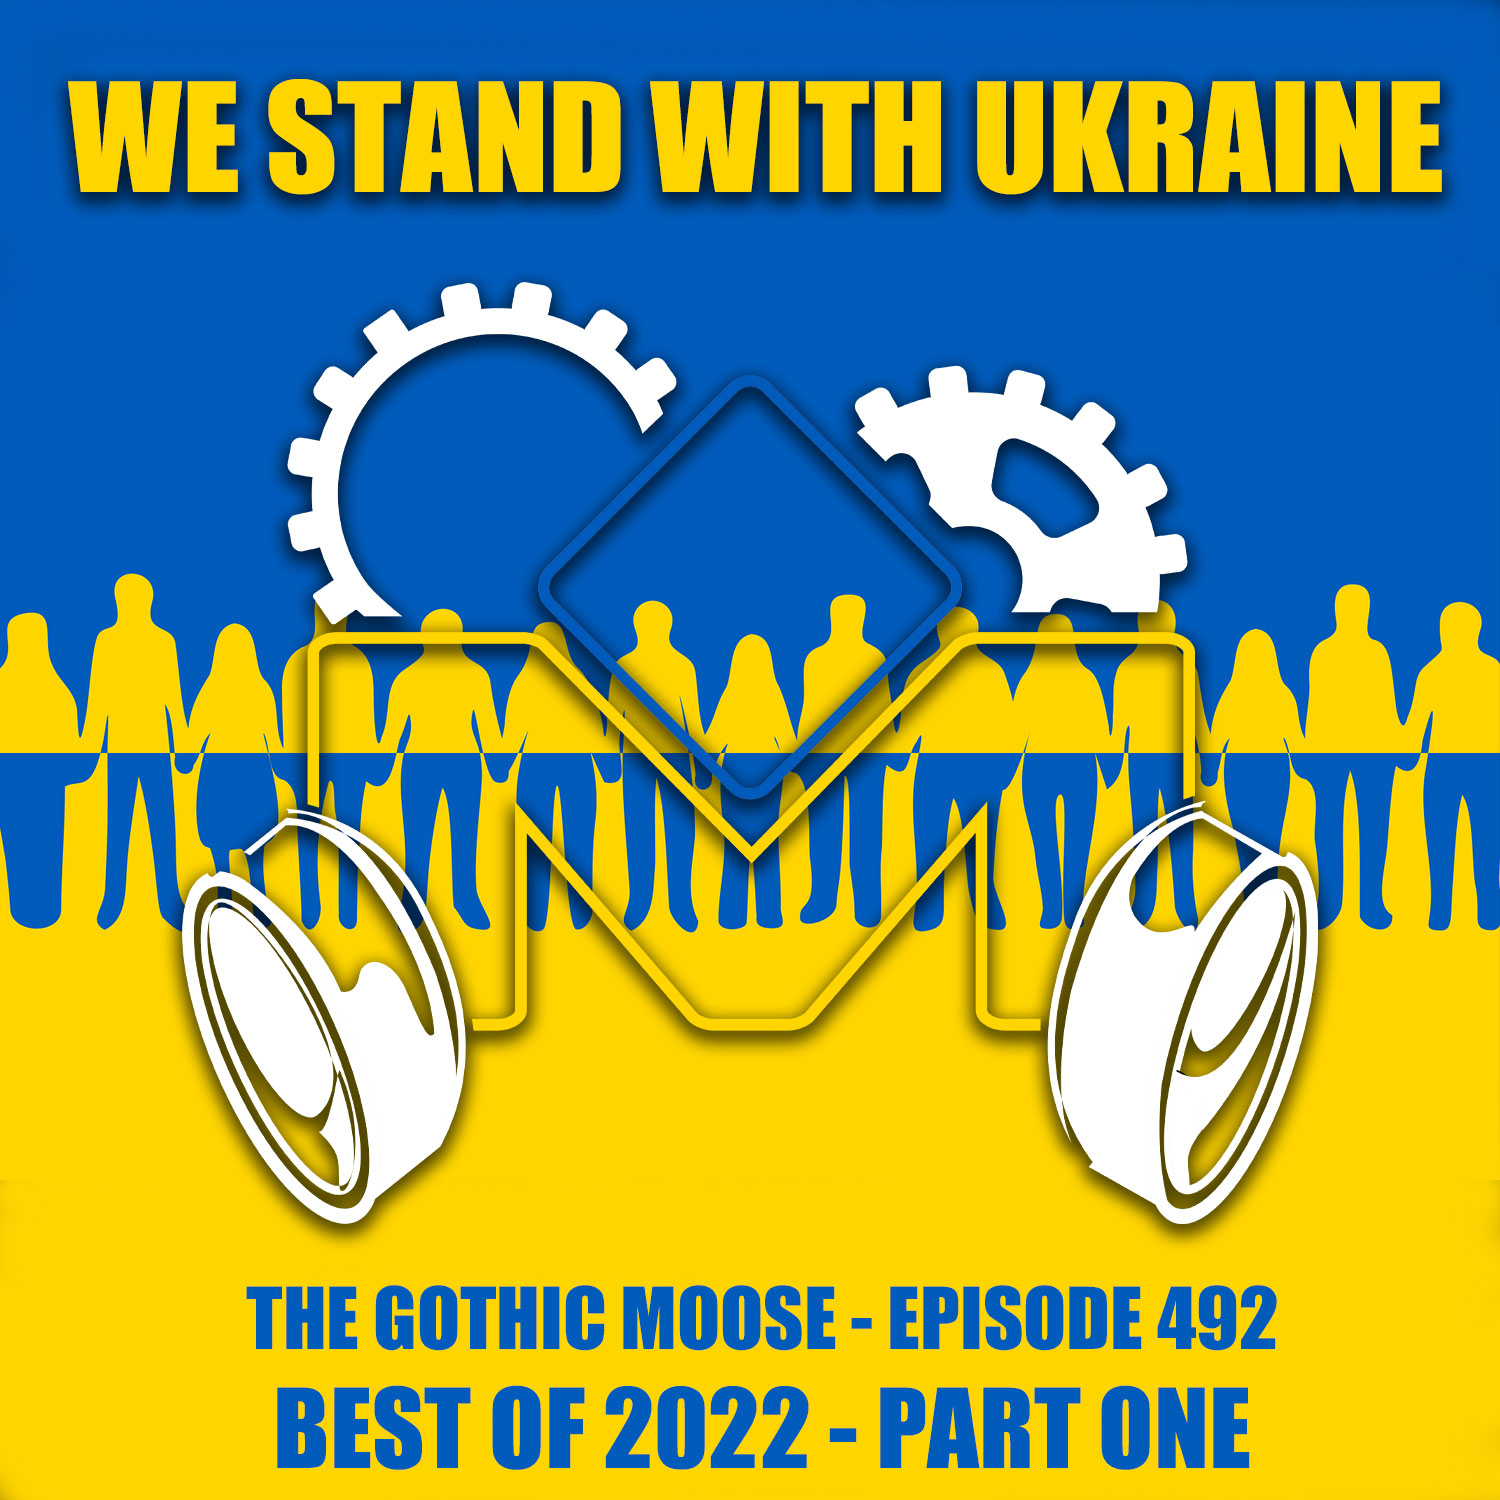 The Gothic Moose – Episode 492 – Best of 2022 – Part 1 – Bands that support Ukraine